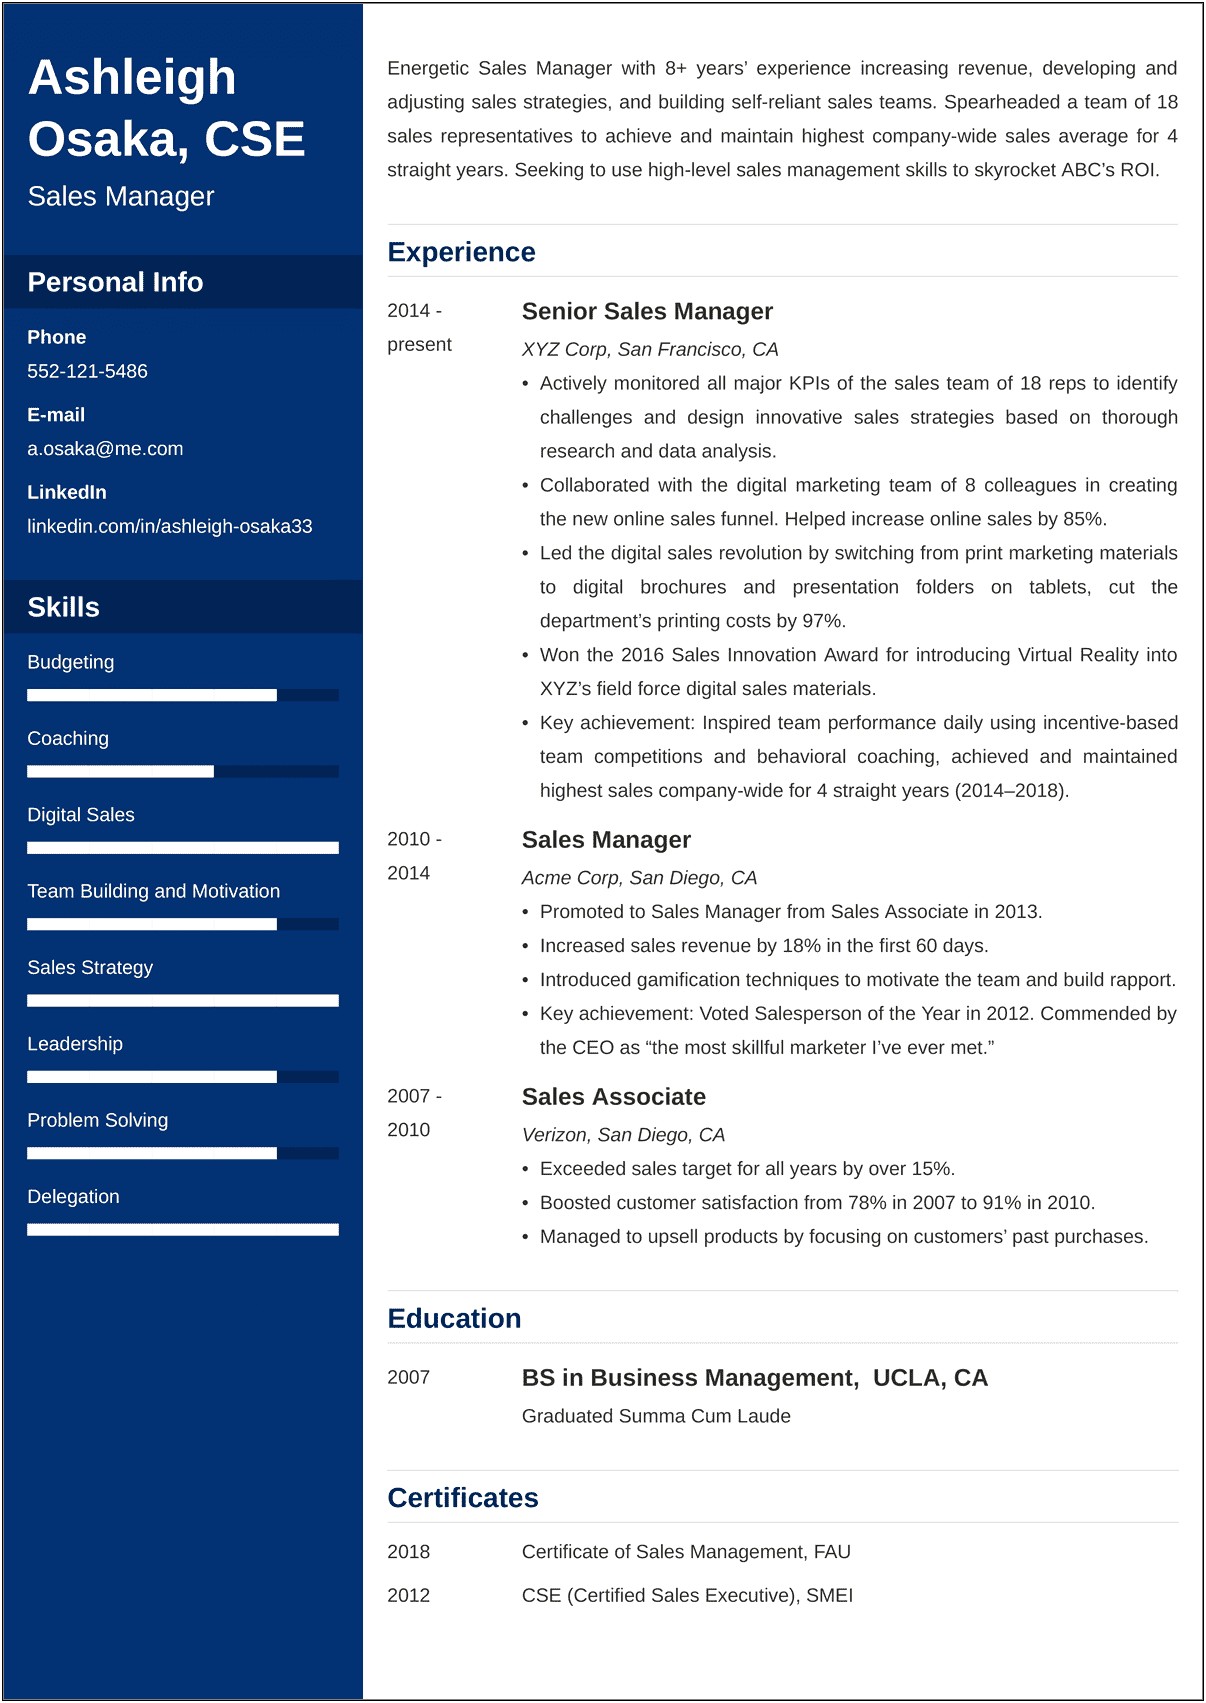 Manager Multi Unit Manager Resume